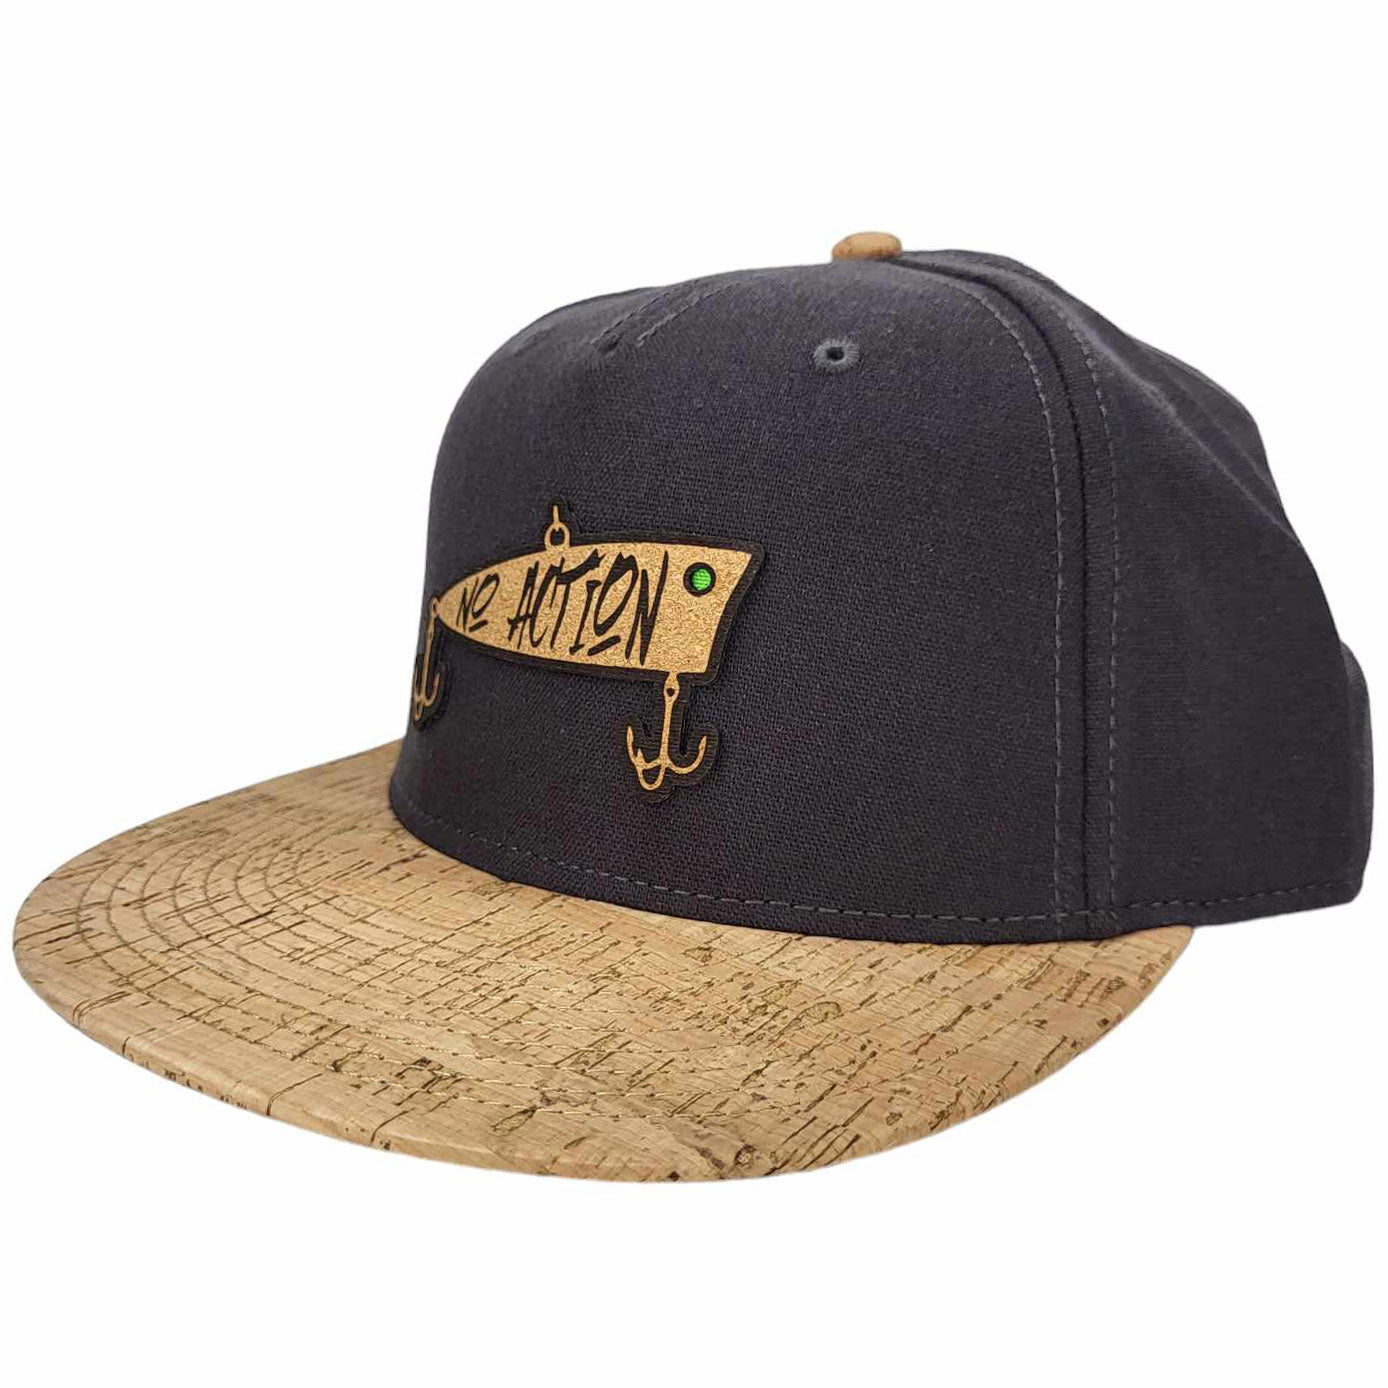 No Action Fishing Cork Patch Hat